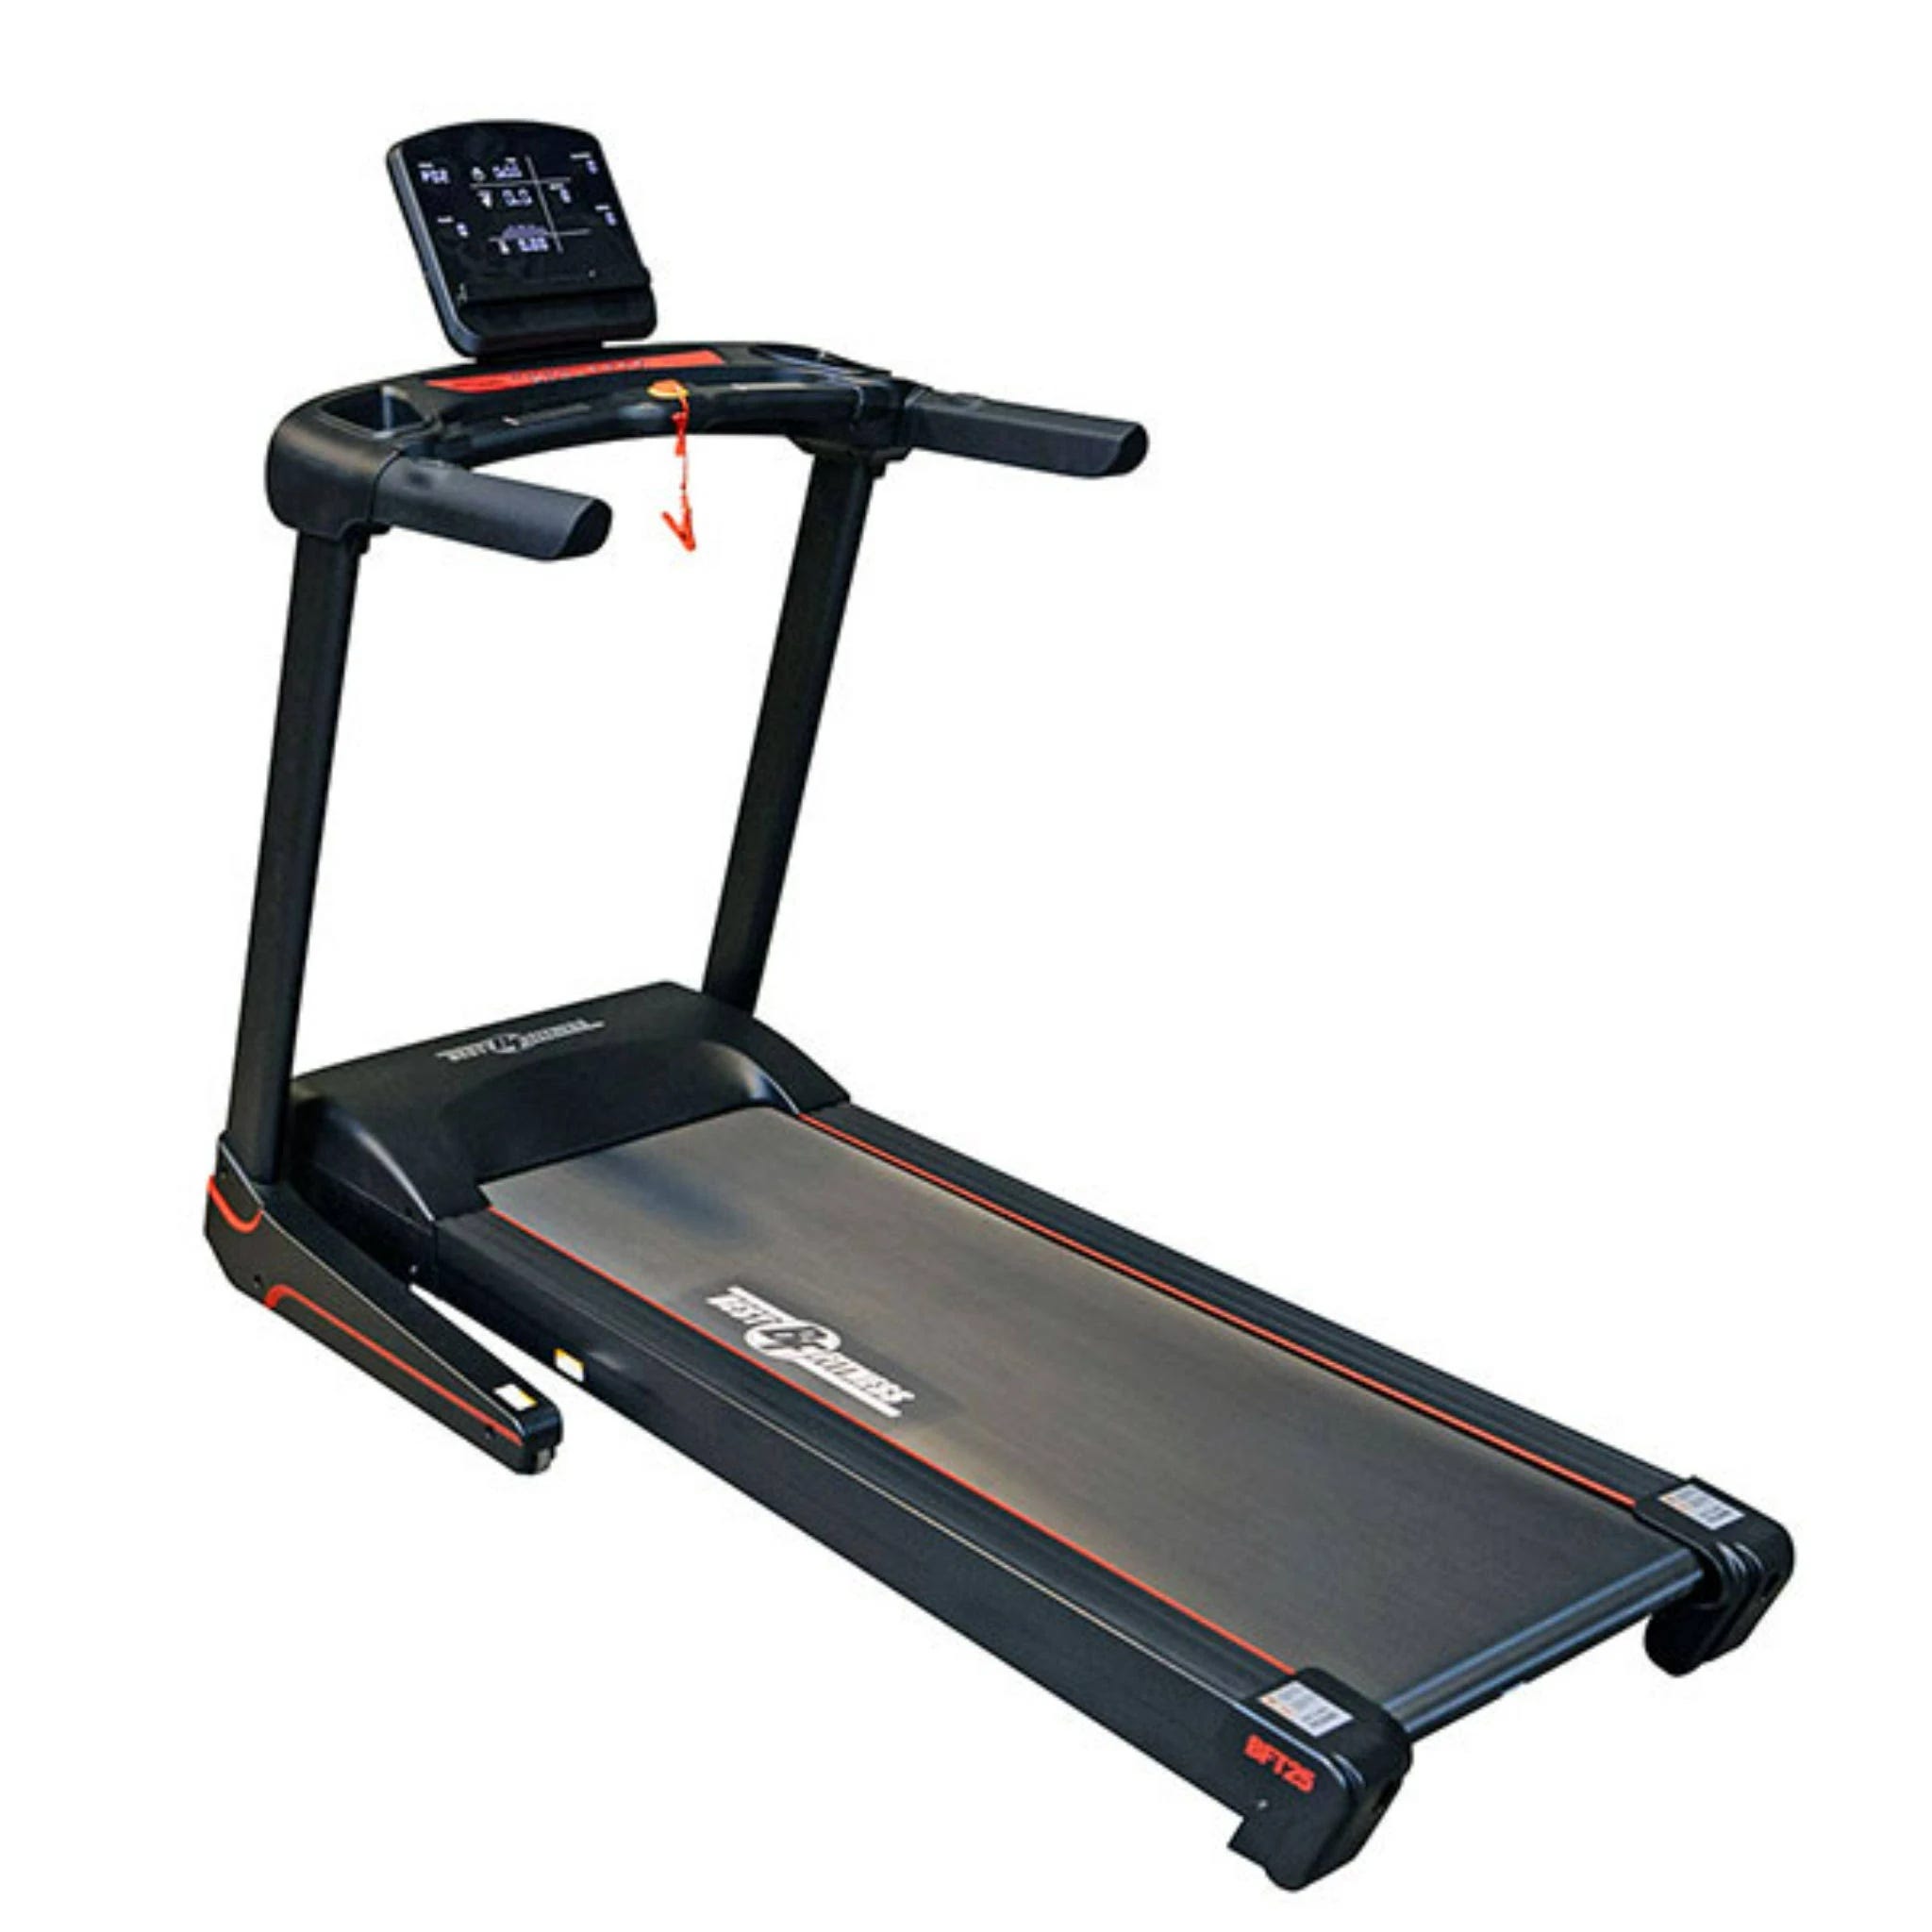 Best Fitness Folding Treadmill for Home Workouts (1.5 HP, 15 Incline Levels, 0.6-10 mph Speeds) | Image